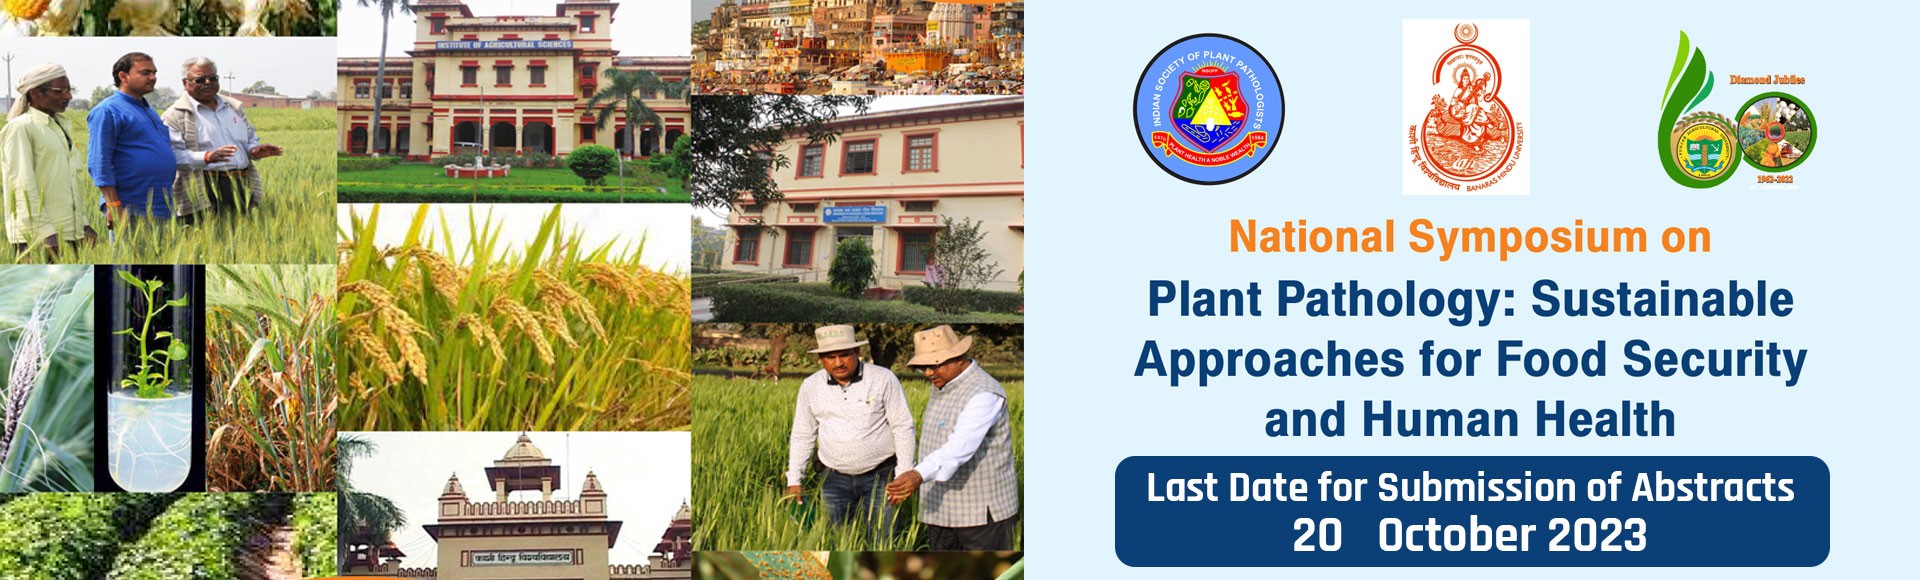 National Symposium on Plant Pathology: Sustainable Approaches for Food Security and Human Health on 8-9 December, 2023 at Banaras Hindu University